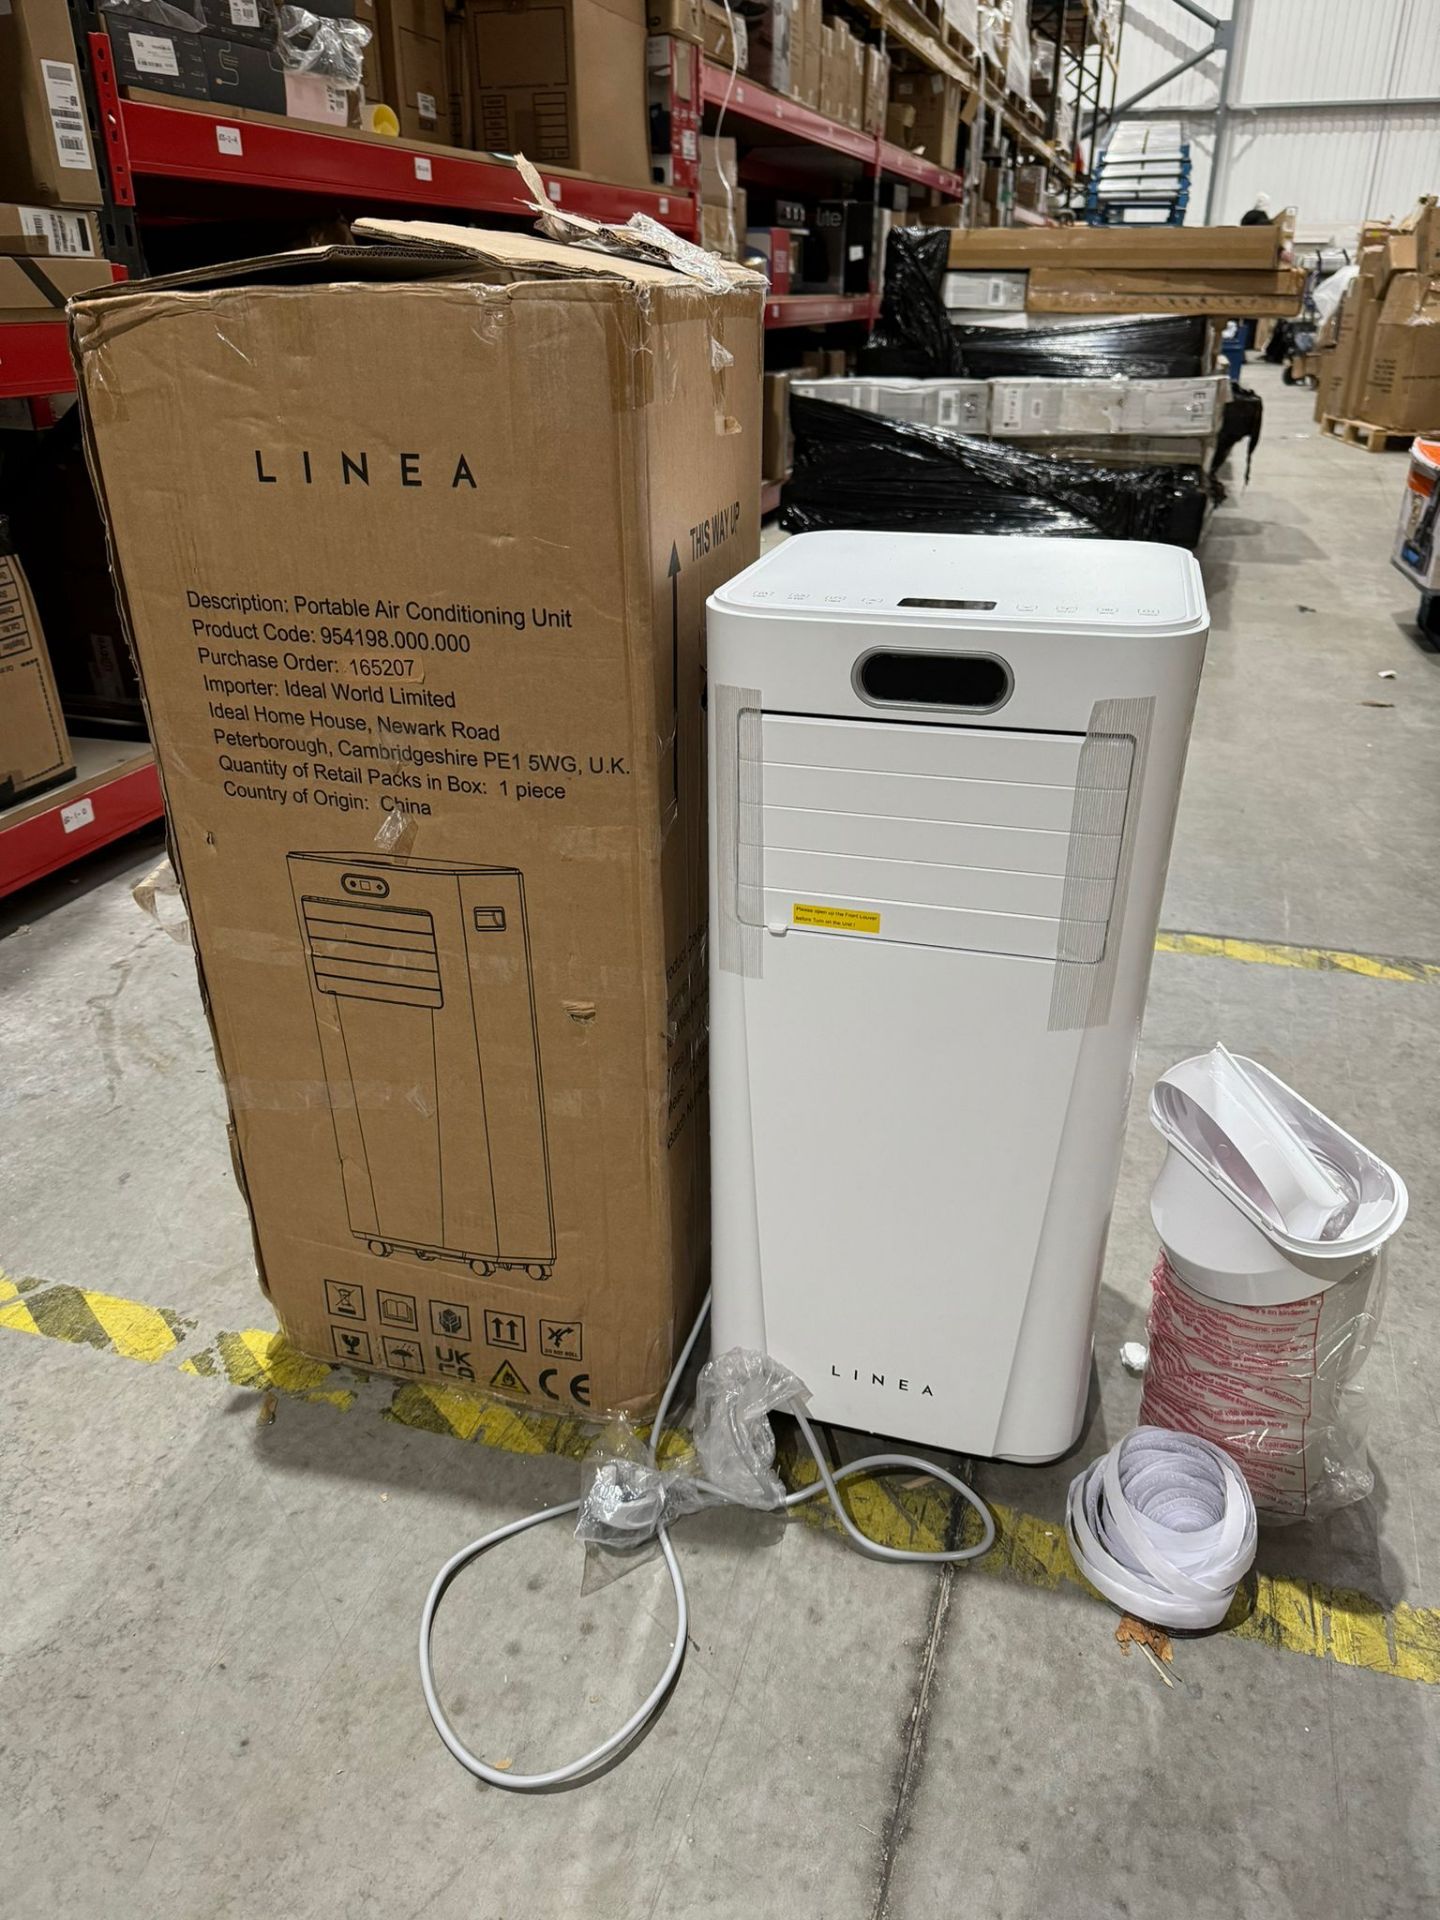 1 x LINEA Portable Air Conditioning Unit - 954198.000.000 with Window Kit - NO RESERVE - Image 7 of 8